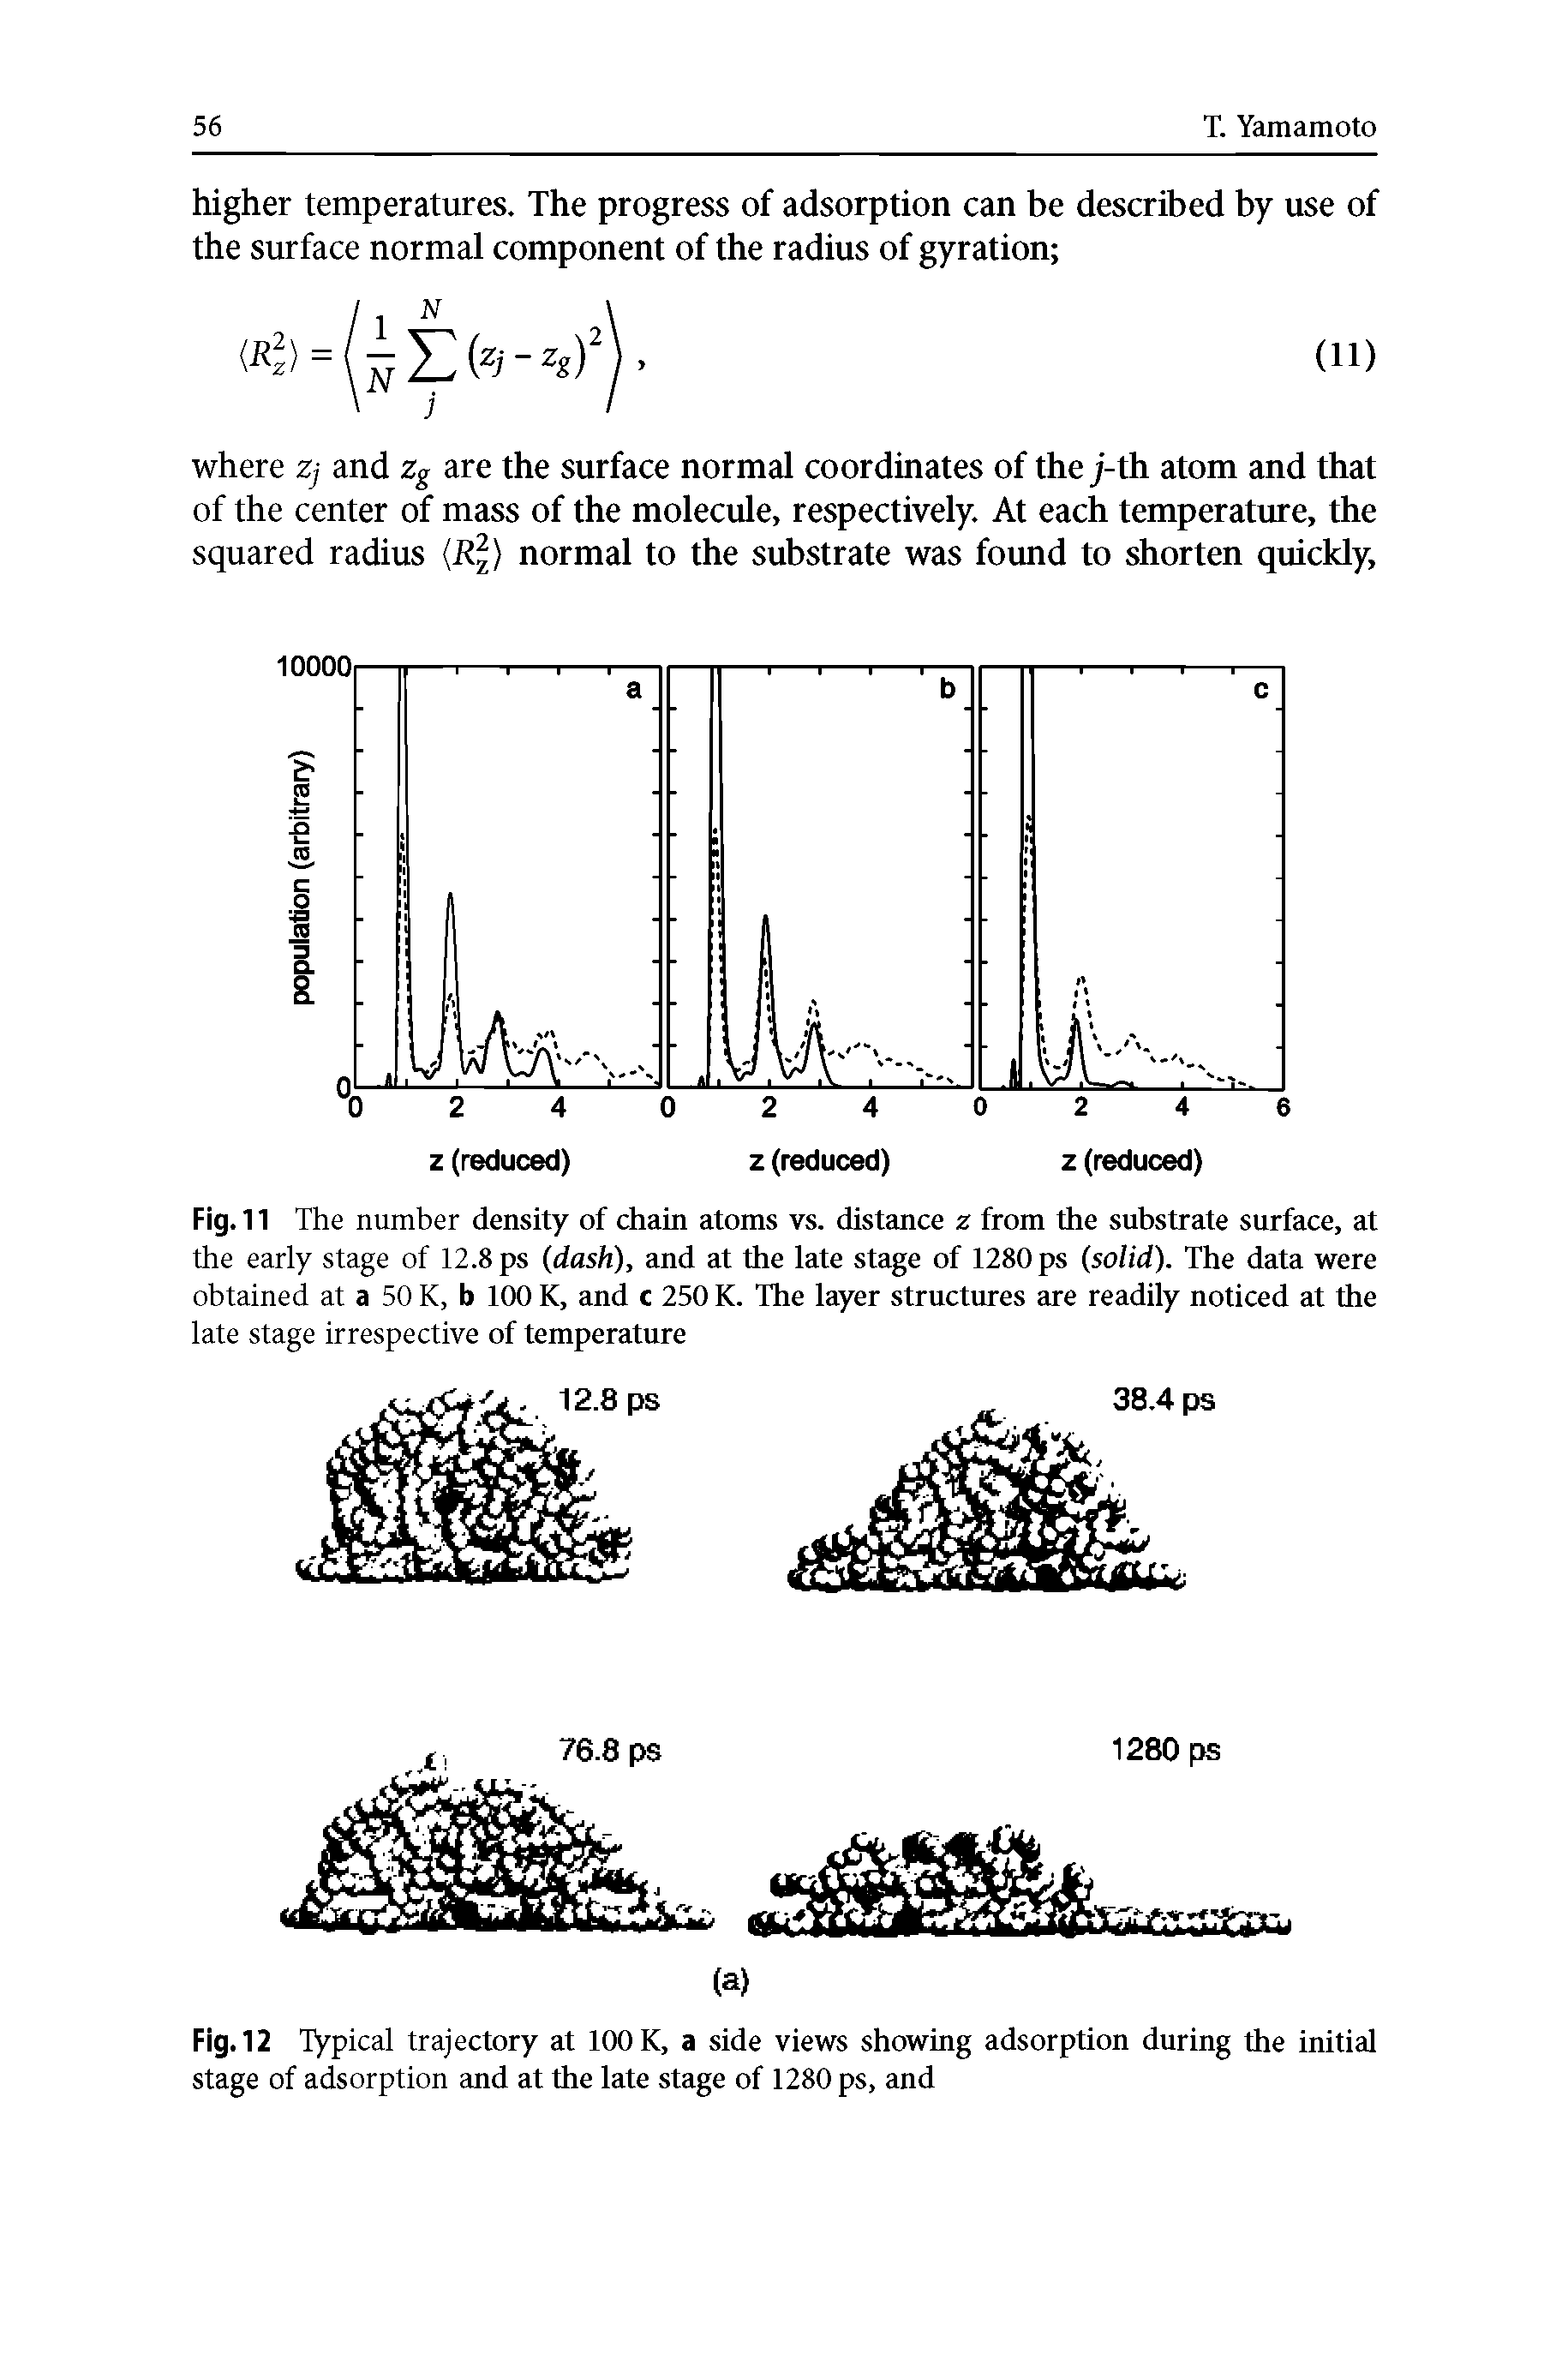 Fig. 12 Typical trajectory at 100 K, a side views showing adsorption during the initial stage of adsorption and at the late stage of 1280 ps, and...